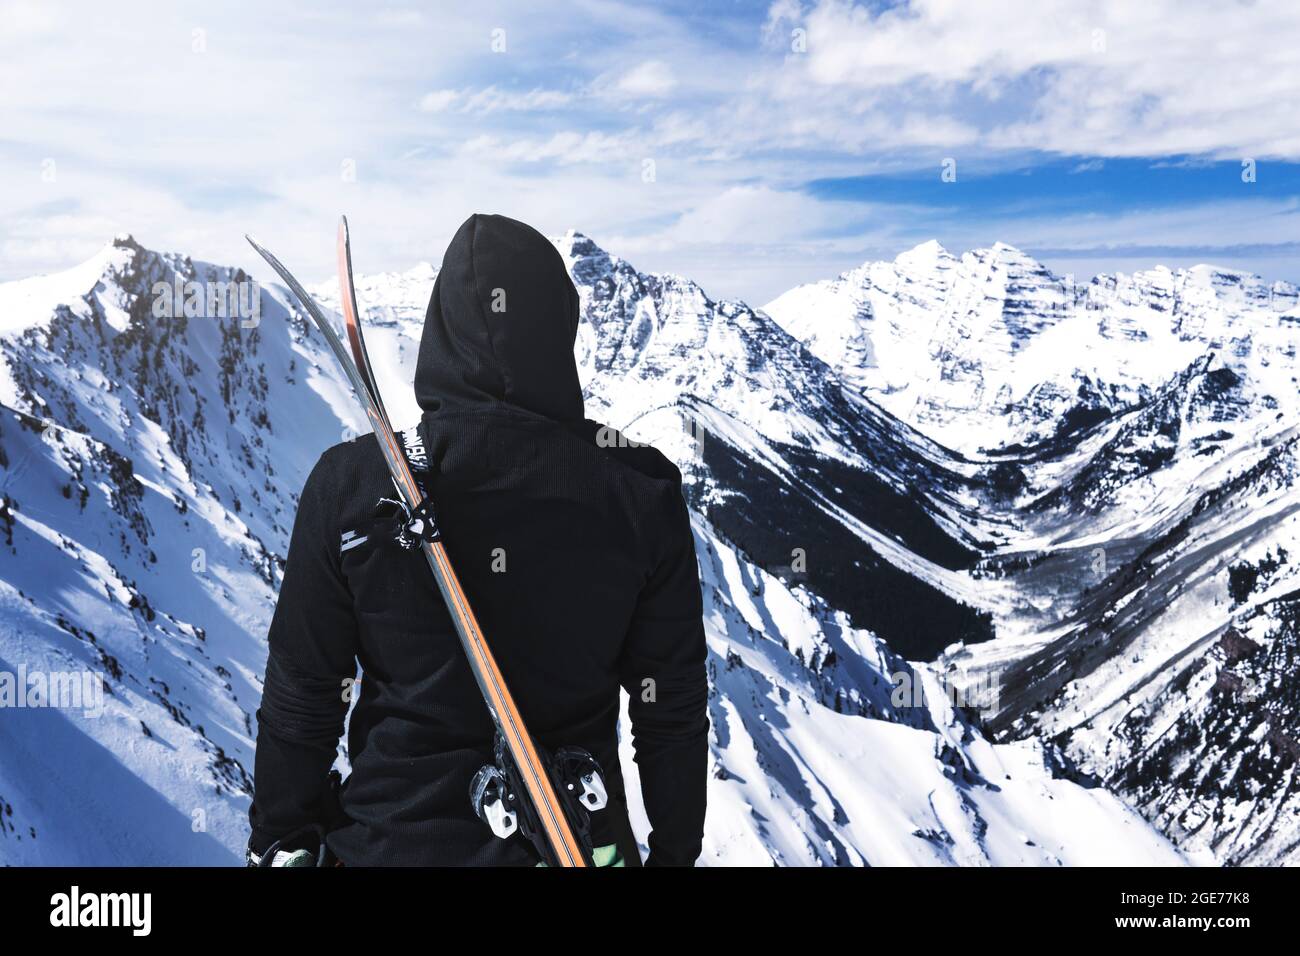 Hooded Person With Skis On Back At Top Of Winter Mountain Extreme Ski Sport Concept Stock Photo